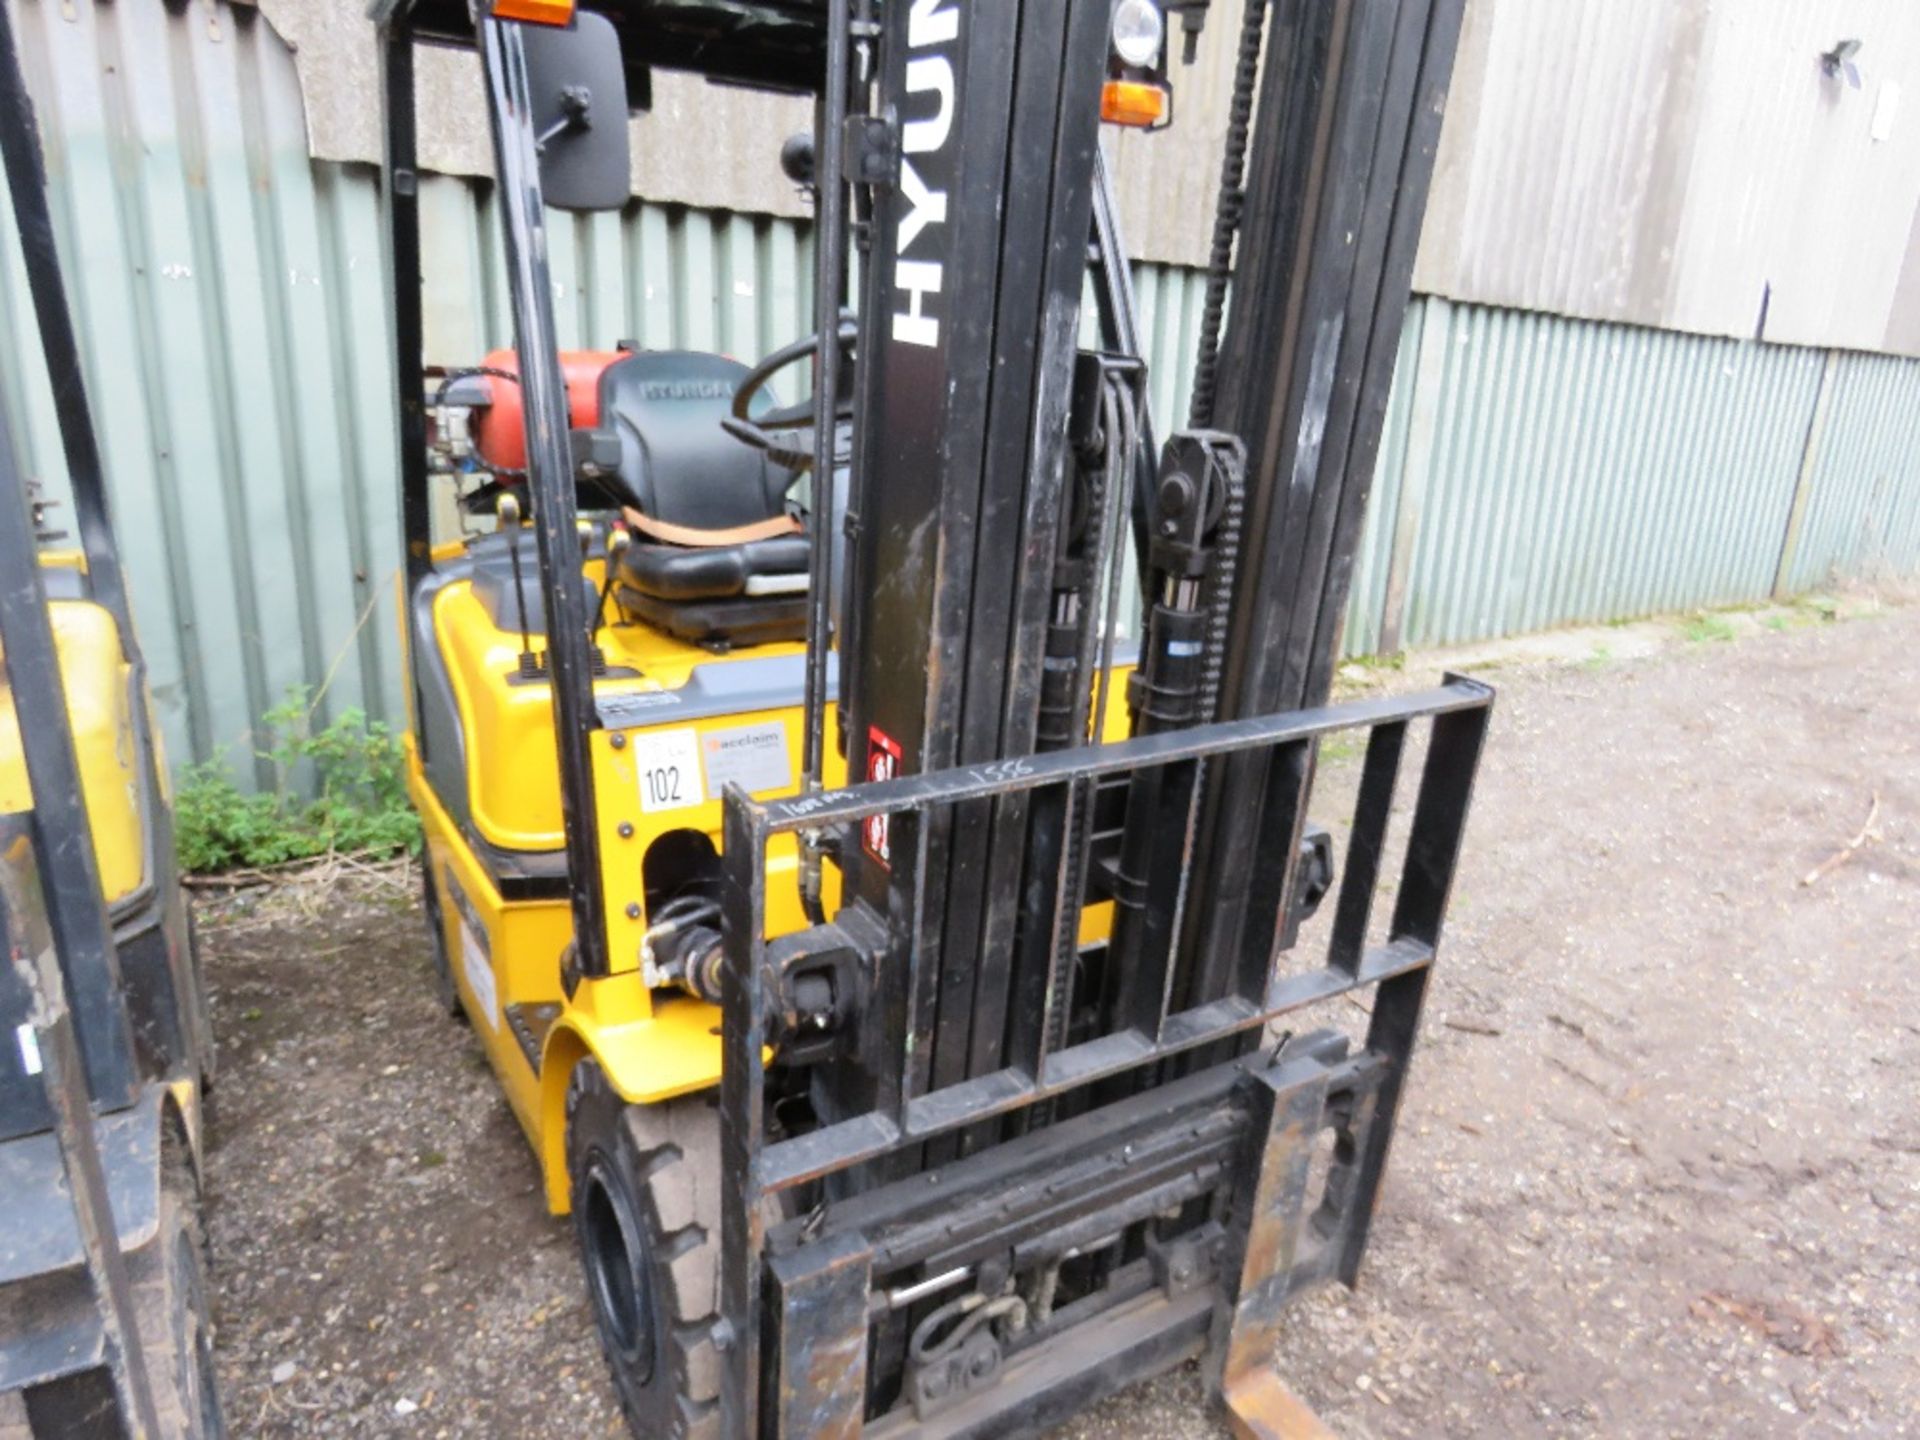 HYUNDAI 20L-7M GAS POWERED FORKLIFT TRUCK, YEAR 2018. 1600 REC HOURS APPROX. EXTRA SERVICE.